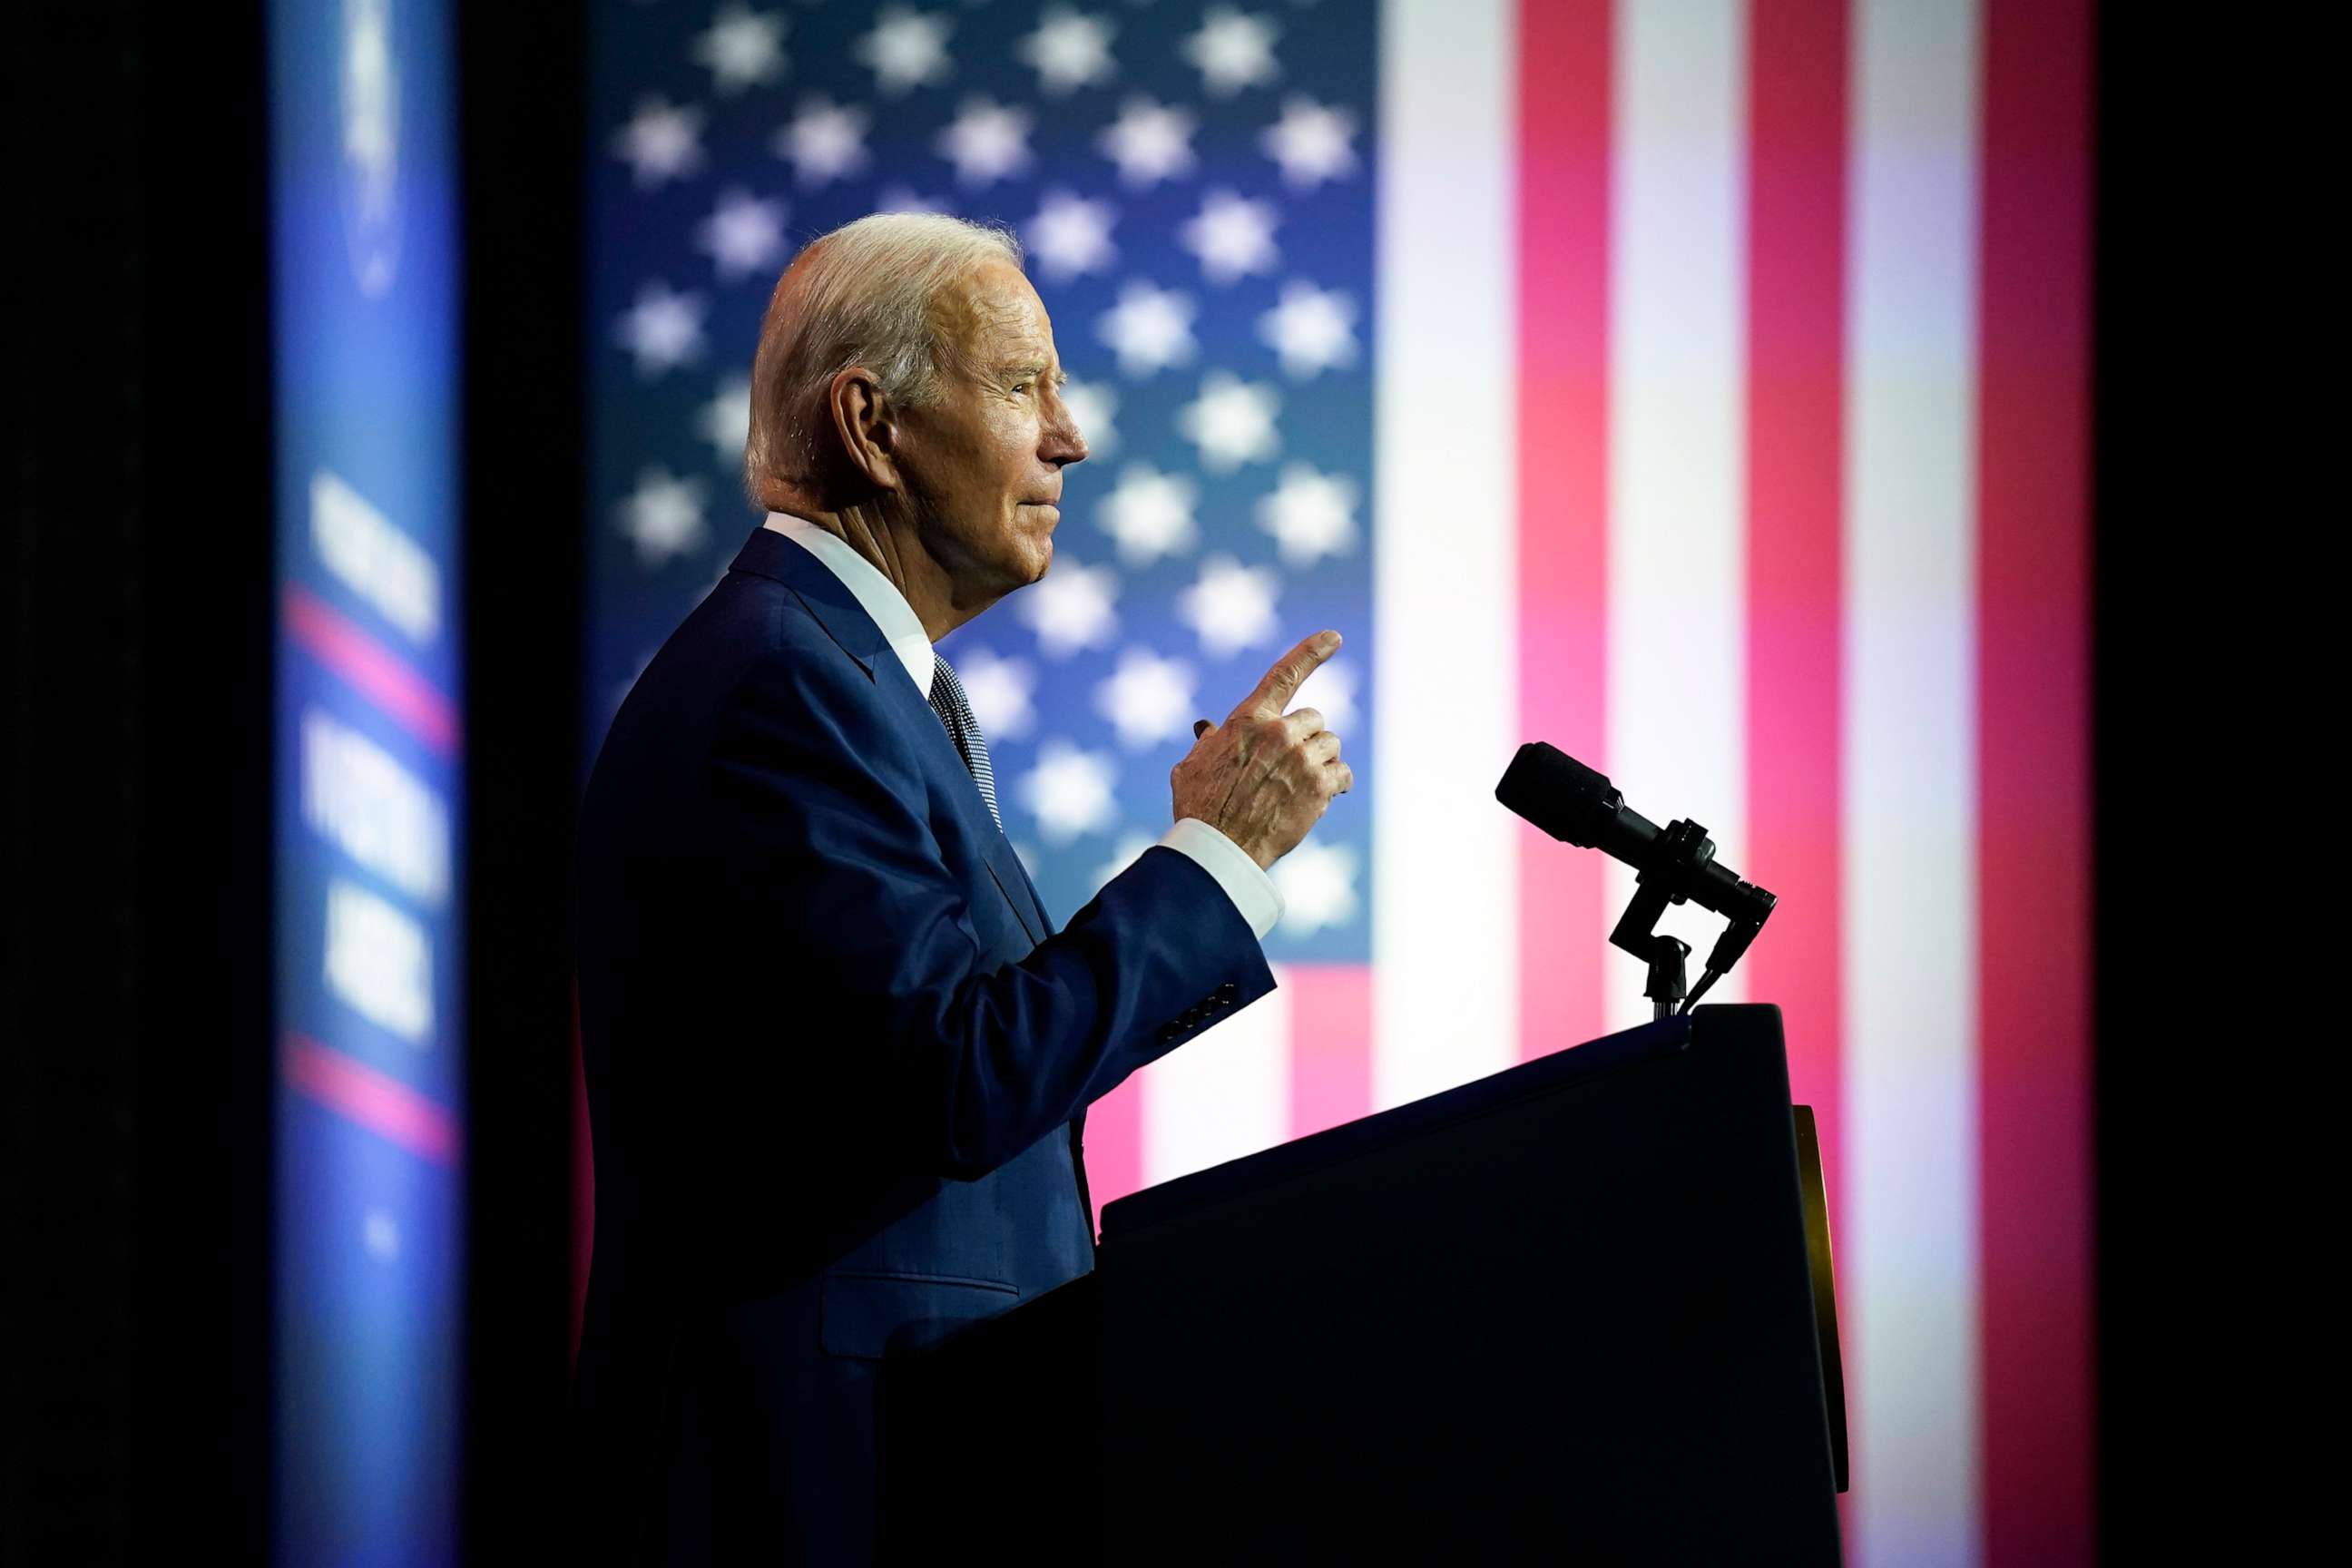 PHOTO: President Joe Biden speaks on the debt limit during an event at SUNY Westchester Community College, on May 10, 2023, in Valhalla, N.Y.